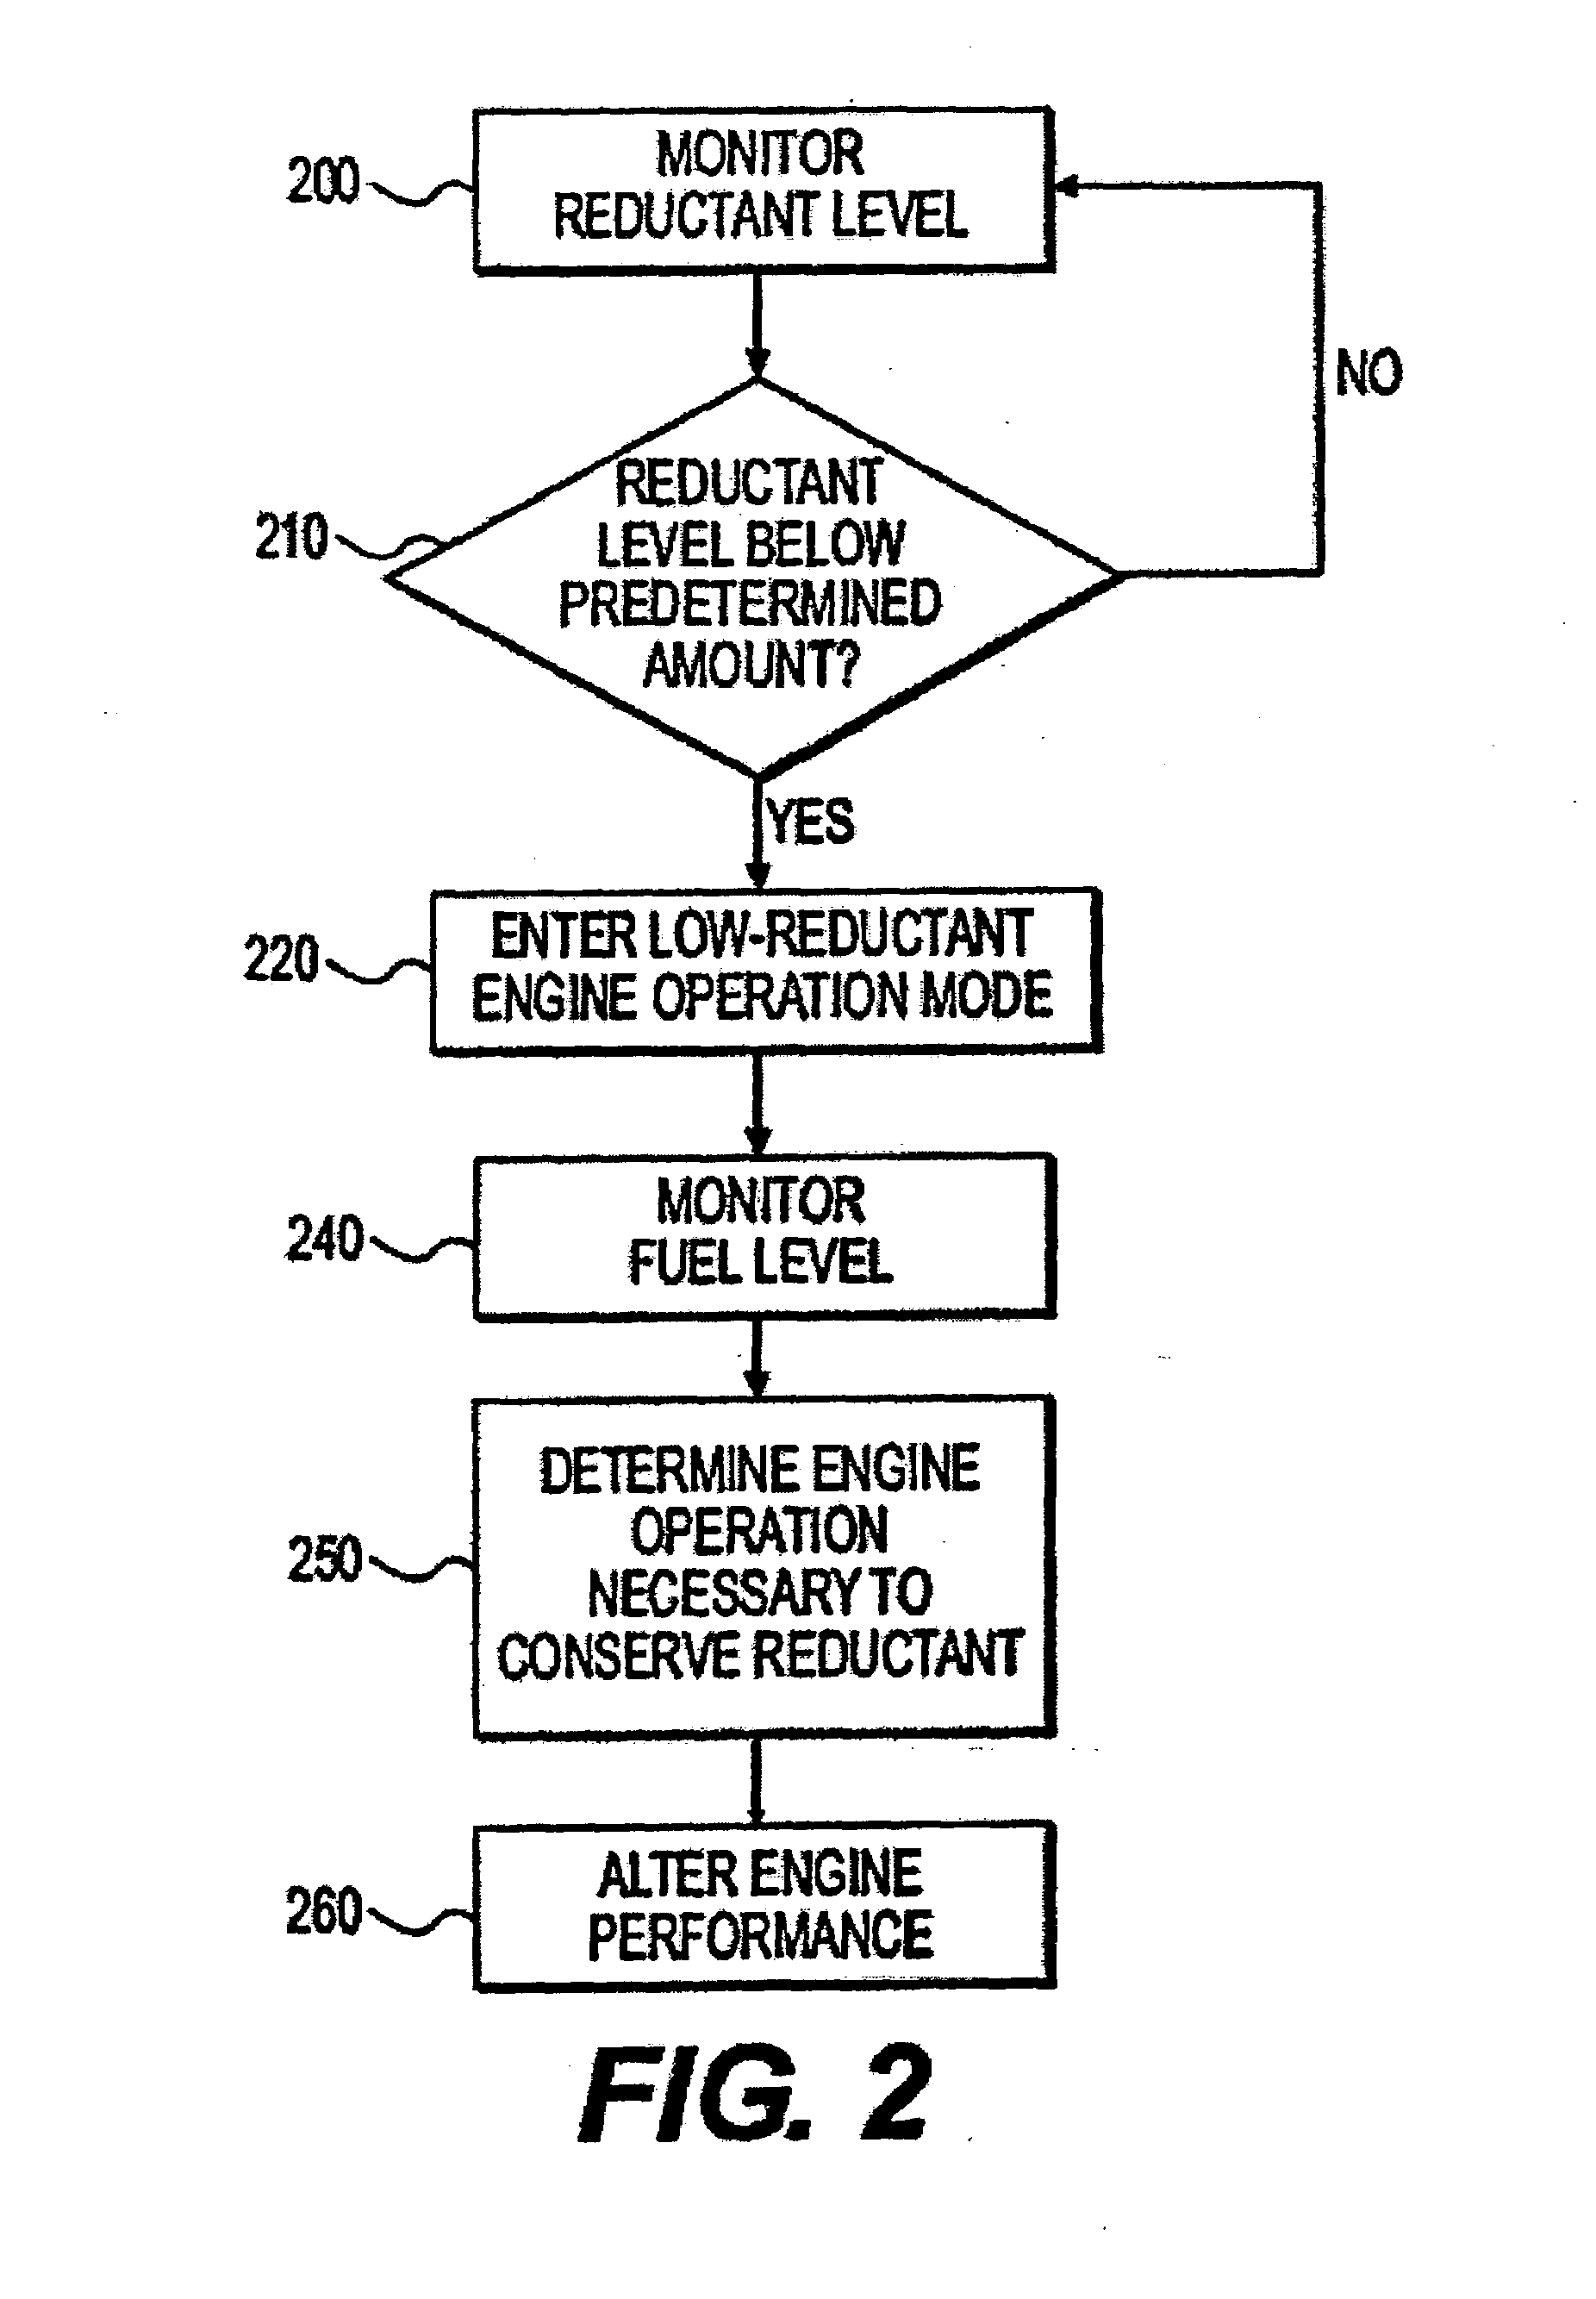 System implementing low-reductant engine operation mode